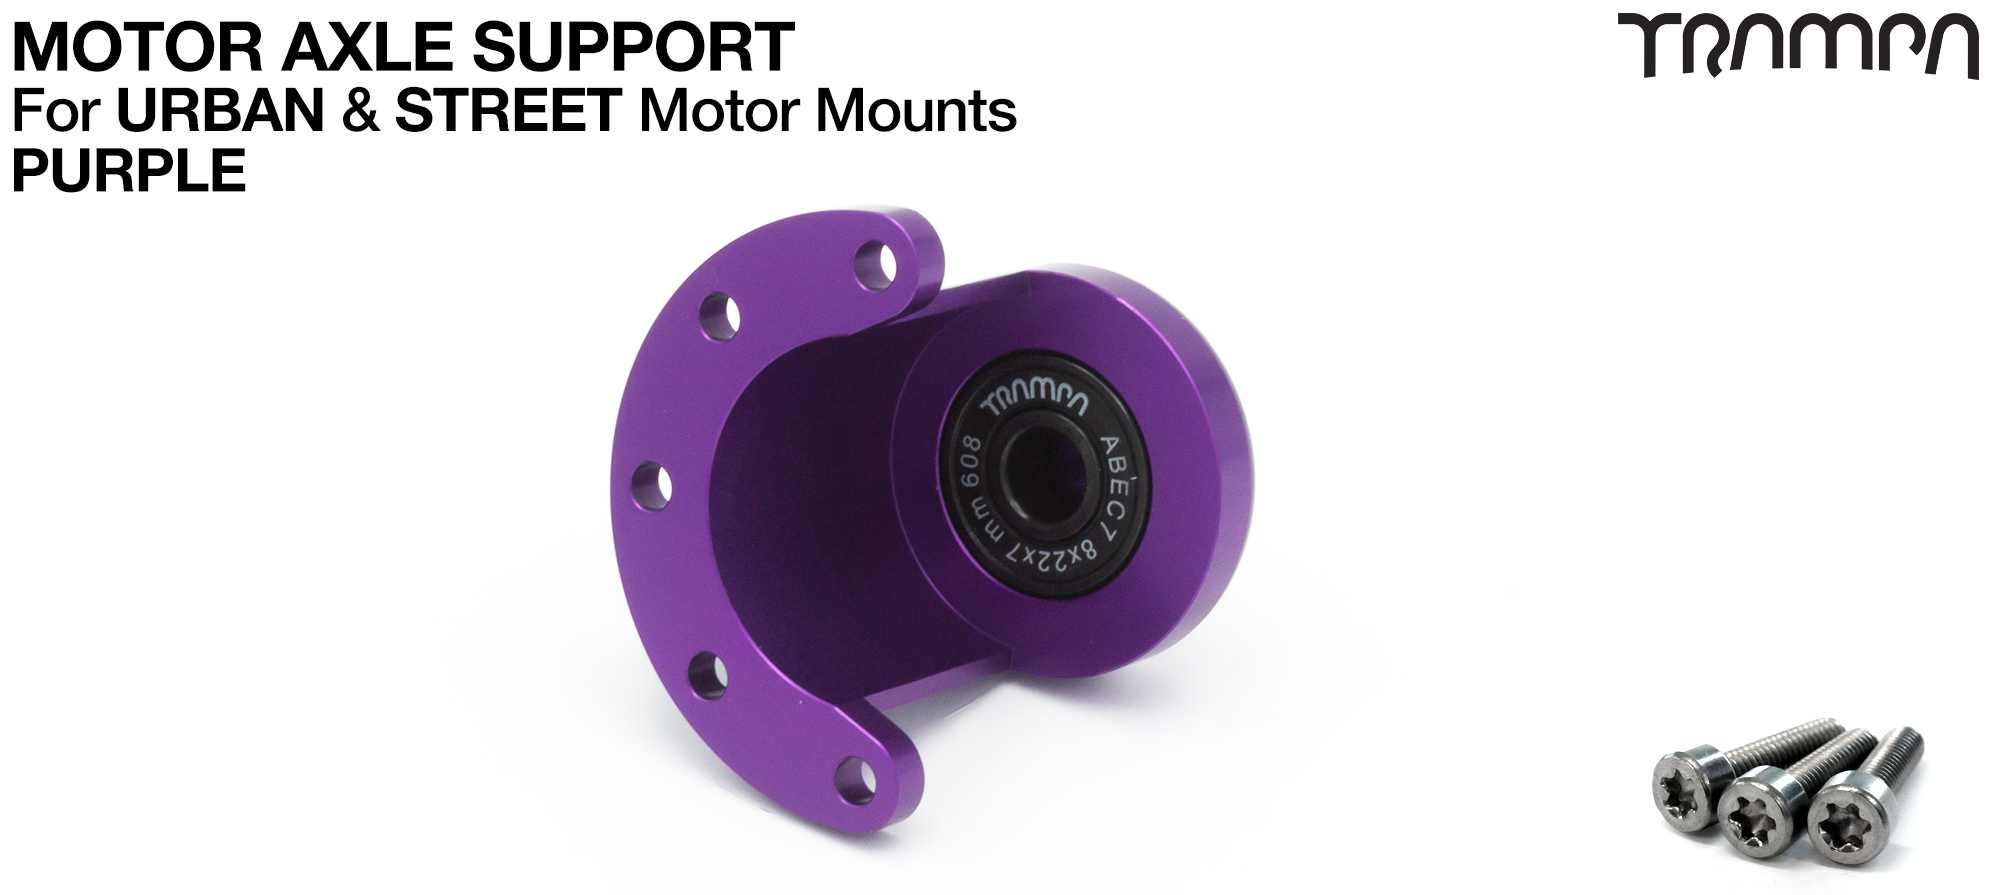 Motor Axle Support Housing with TRAMPA R608 8x22x7mm Bearing, C-Clip & Stainless Steel fixing Bolts for Mini Spring Truck MKII CARVE Motor Mounts UNIVERSAL - PURPLE